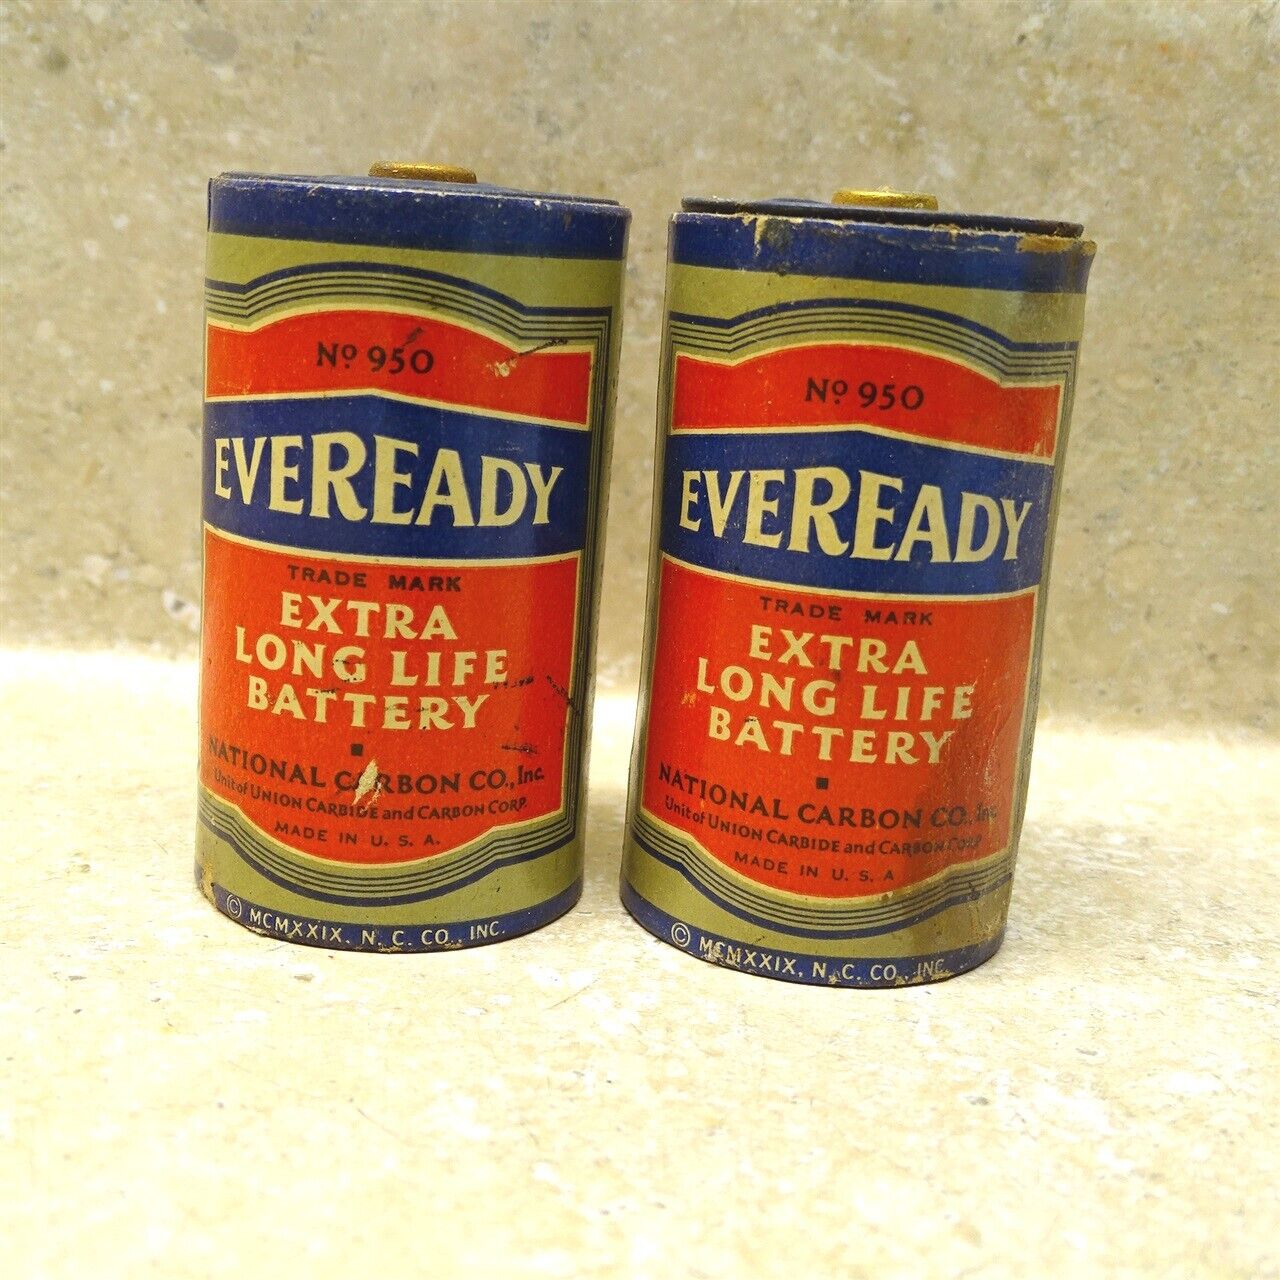 Vintage Eveready Extra Long Life Battery Pair (2) No. 950, MAR. 1933 #2